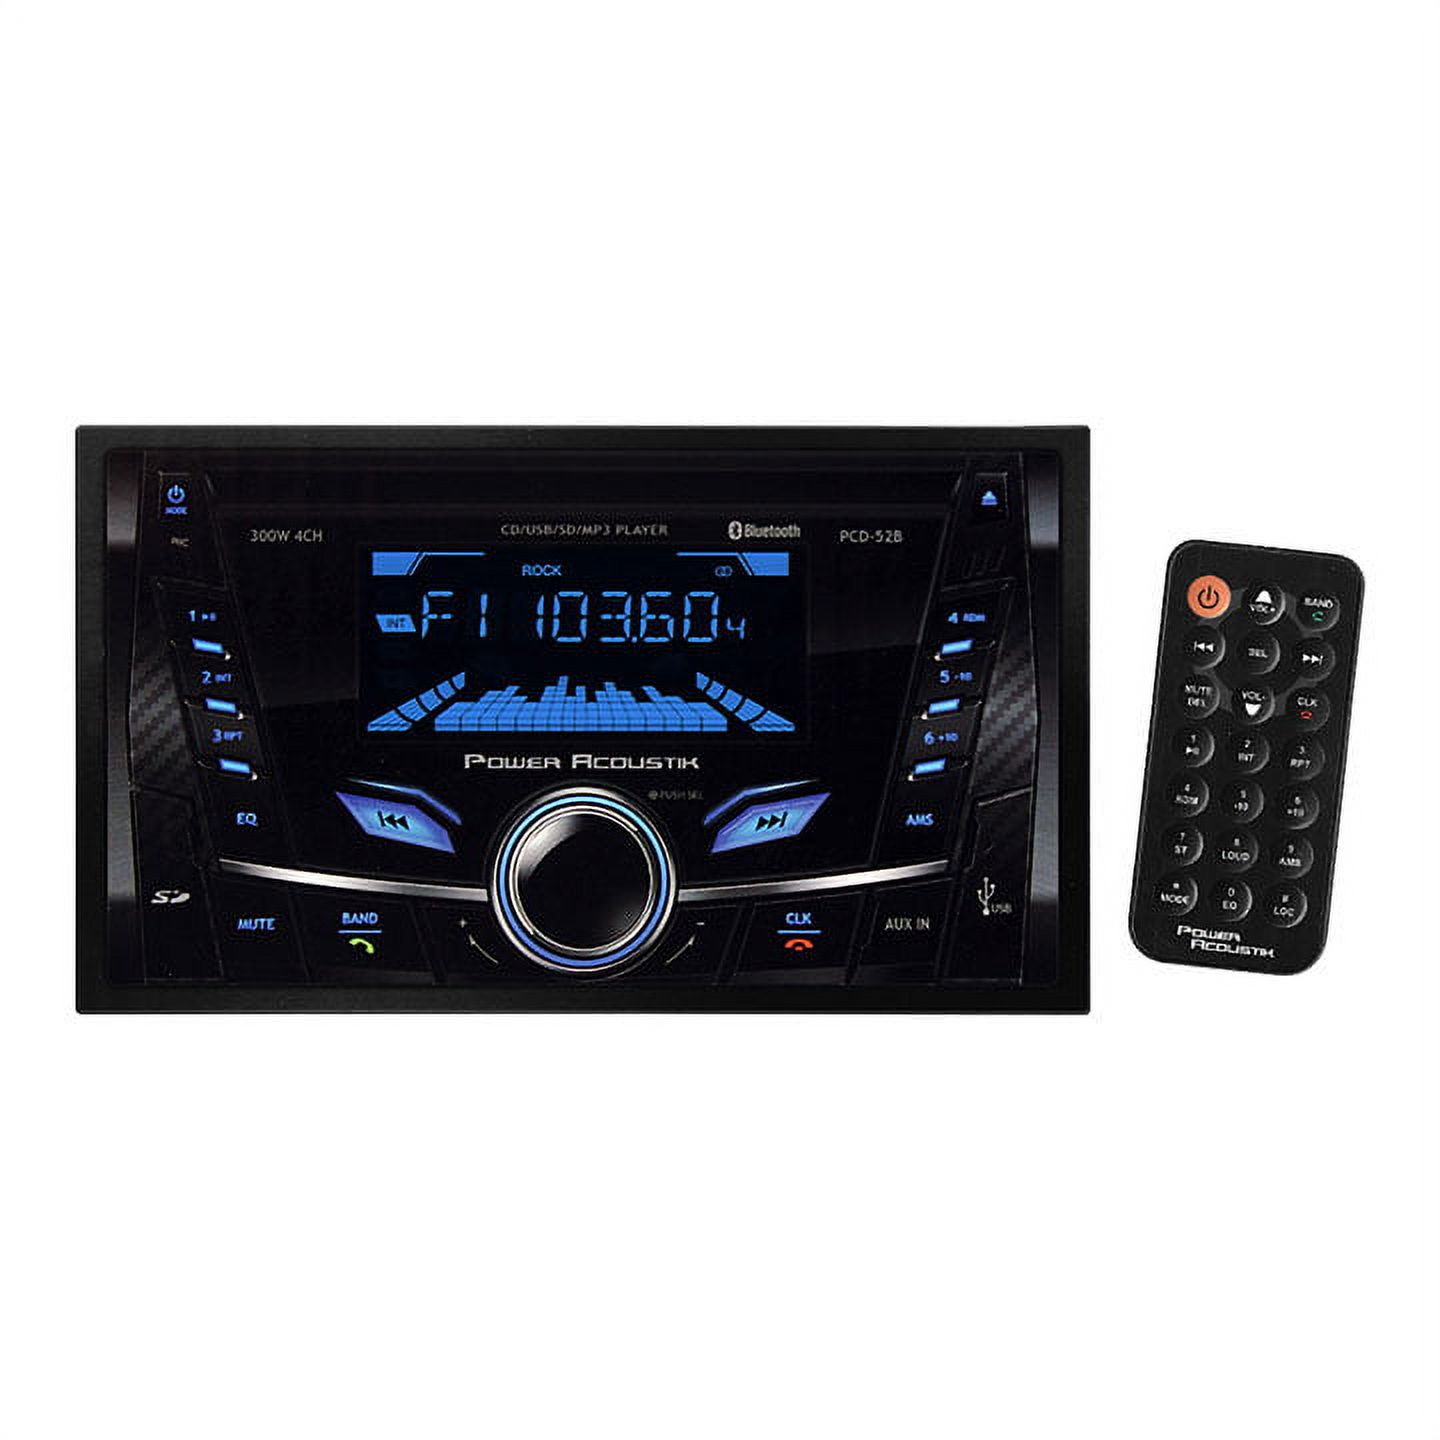 Power Acoustik PCD-52B Double-DIN In-Dash CD-MP3 AM-FM Receiver with Bluetooth and USB Playback, Black - image 2 of 4